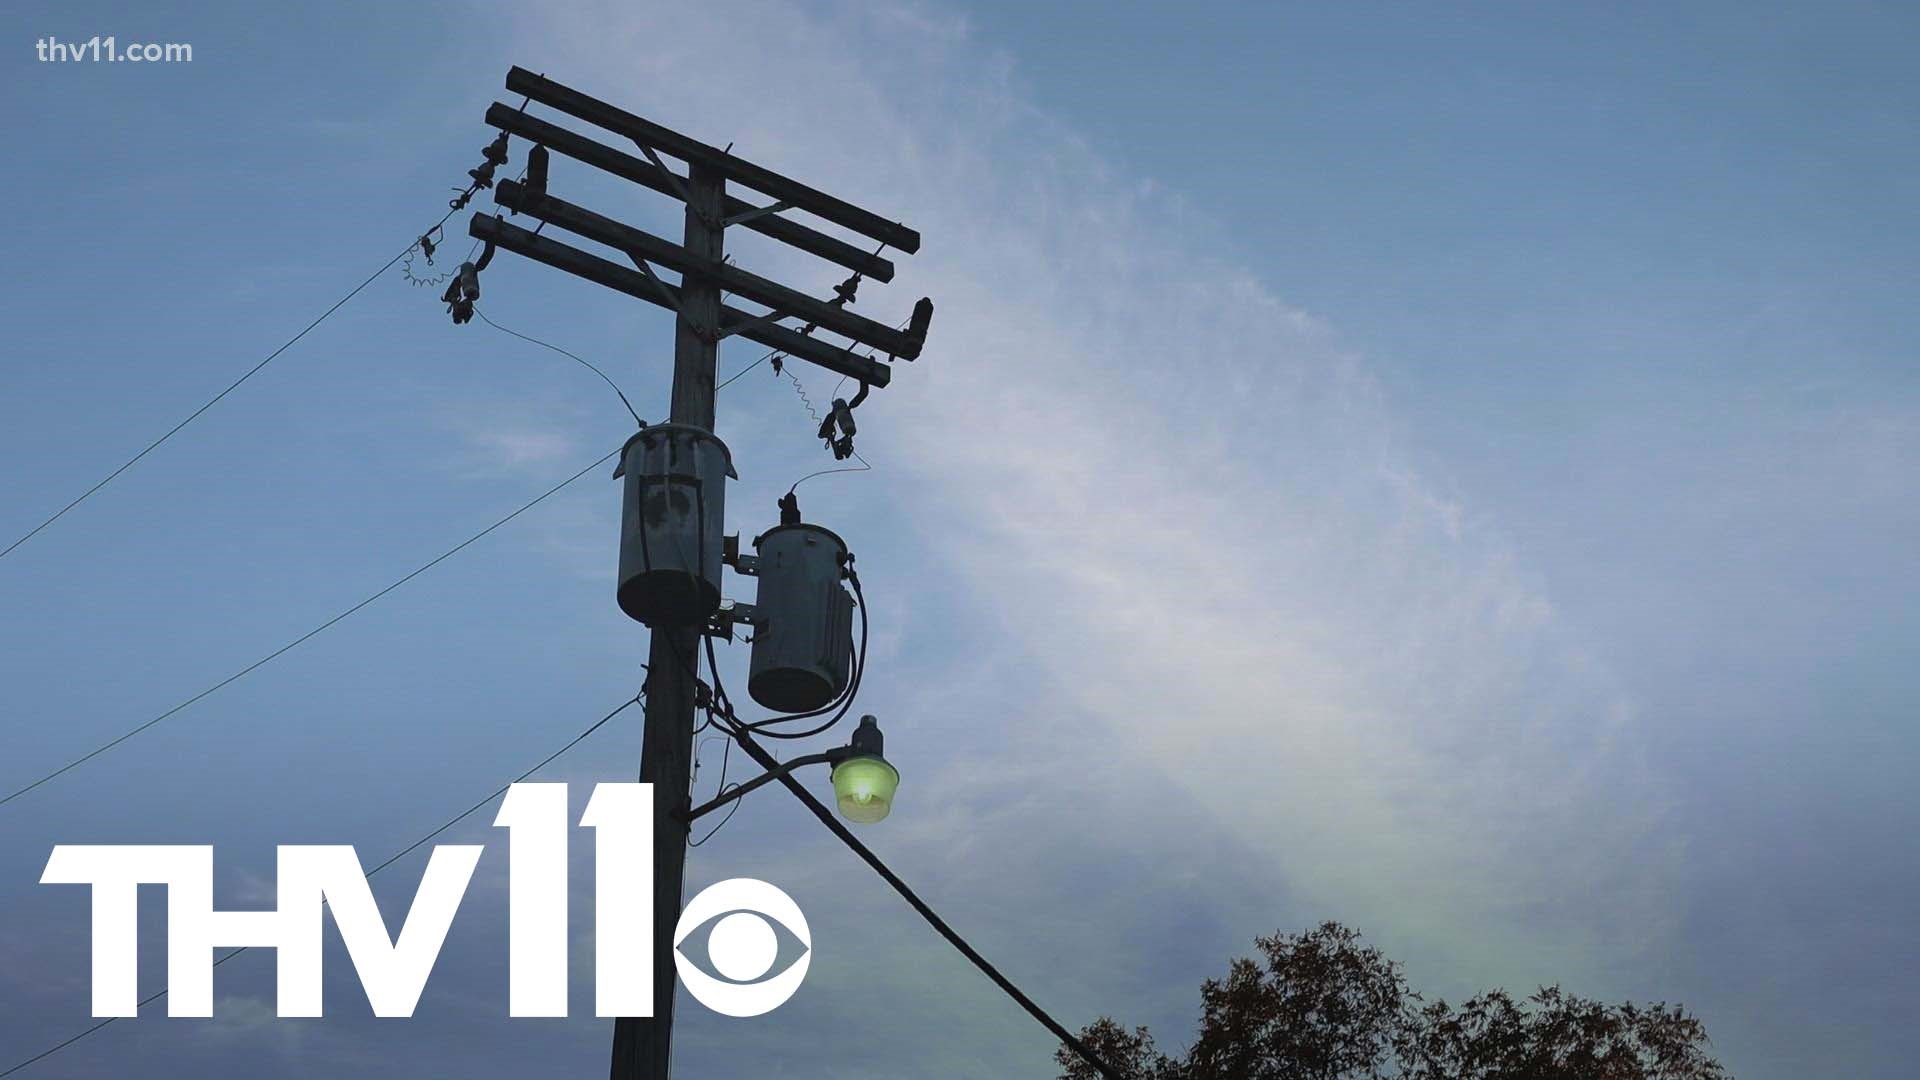 As temperatures rise, issues could arise for those in Arkansas. A recent study shows that power outages could happen in several states over the summer.